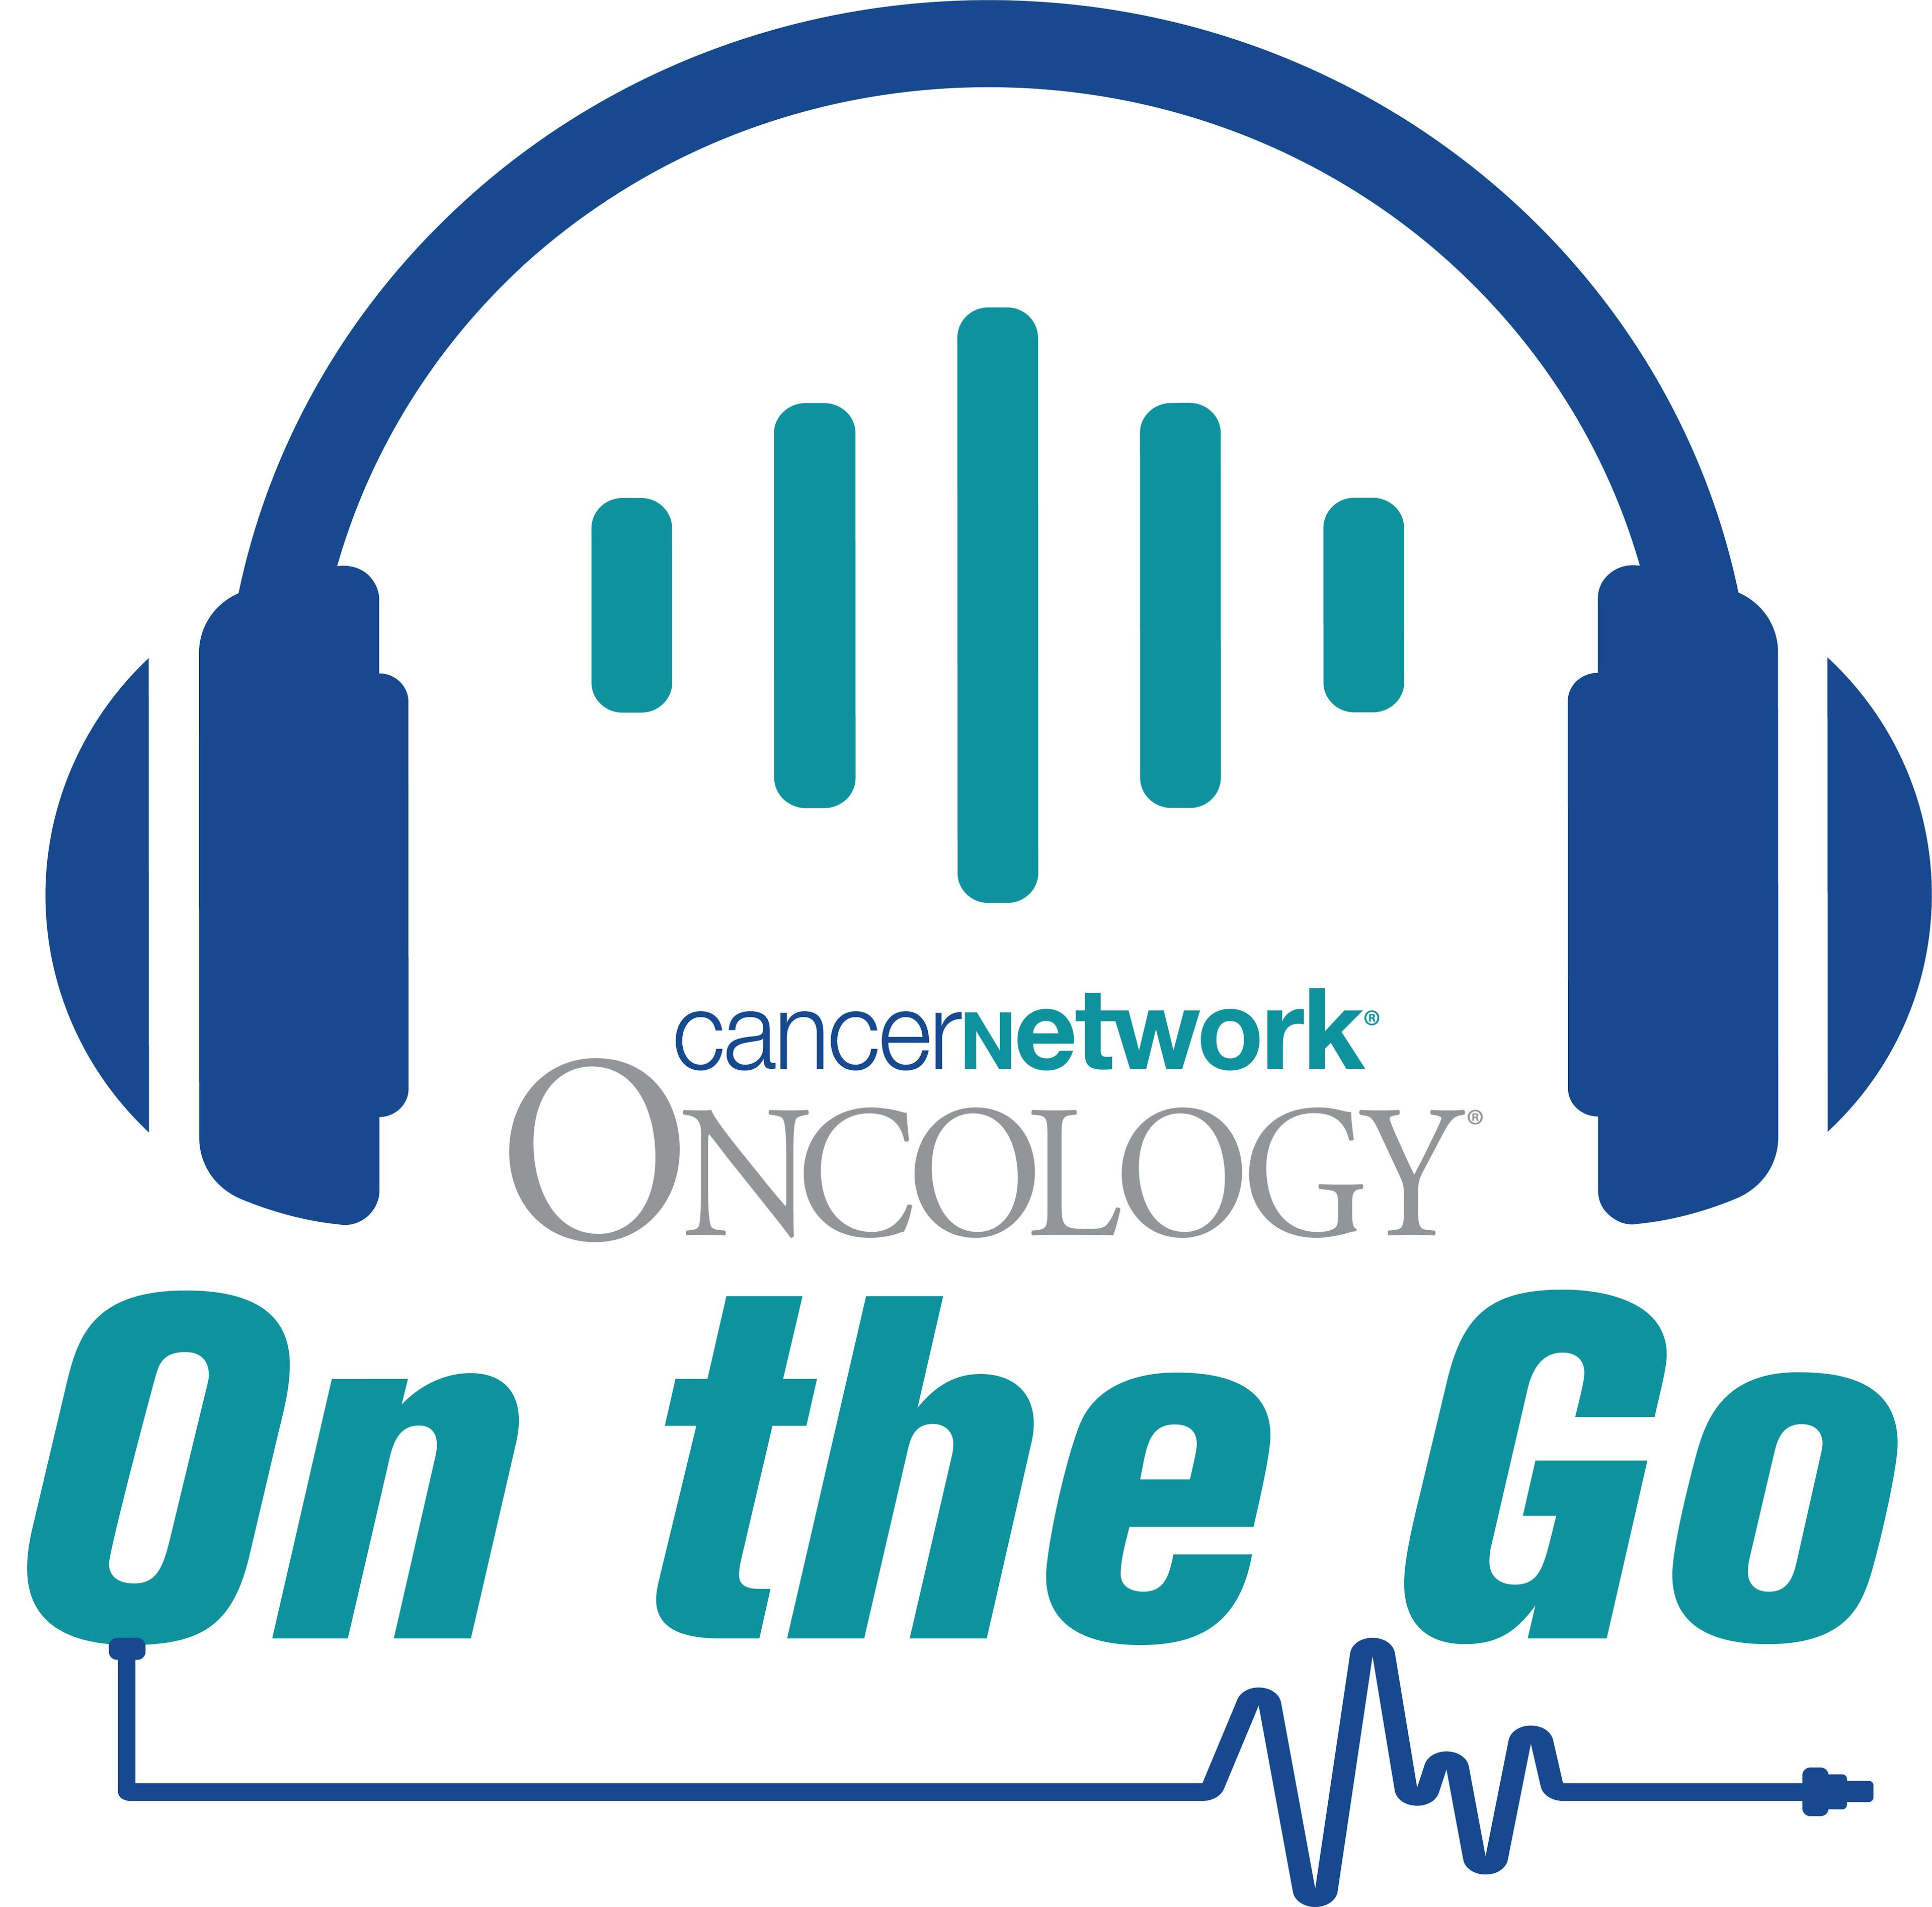 Experts from University of California, Los Angeles Health and Mayo Clinic discuss key data presented at the 2023 American Society of Clinical Oncology (ASCO) Annual Meeting in the gynecologic and gastrointestinal cancer spaces and how they may impact patient care.